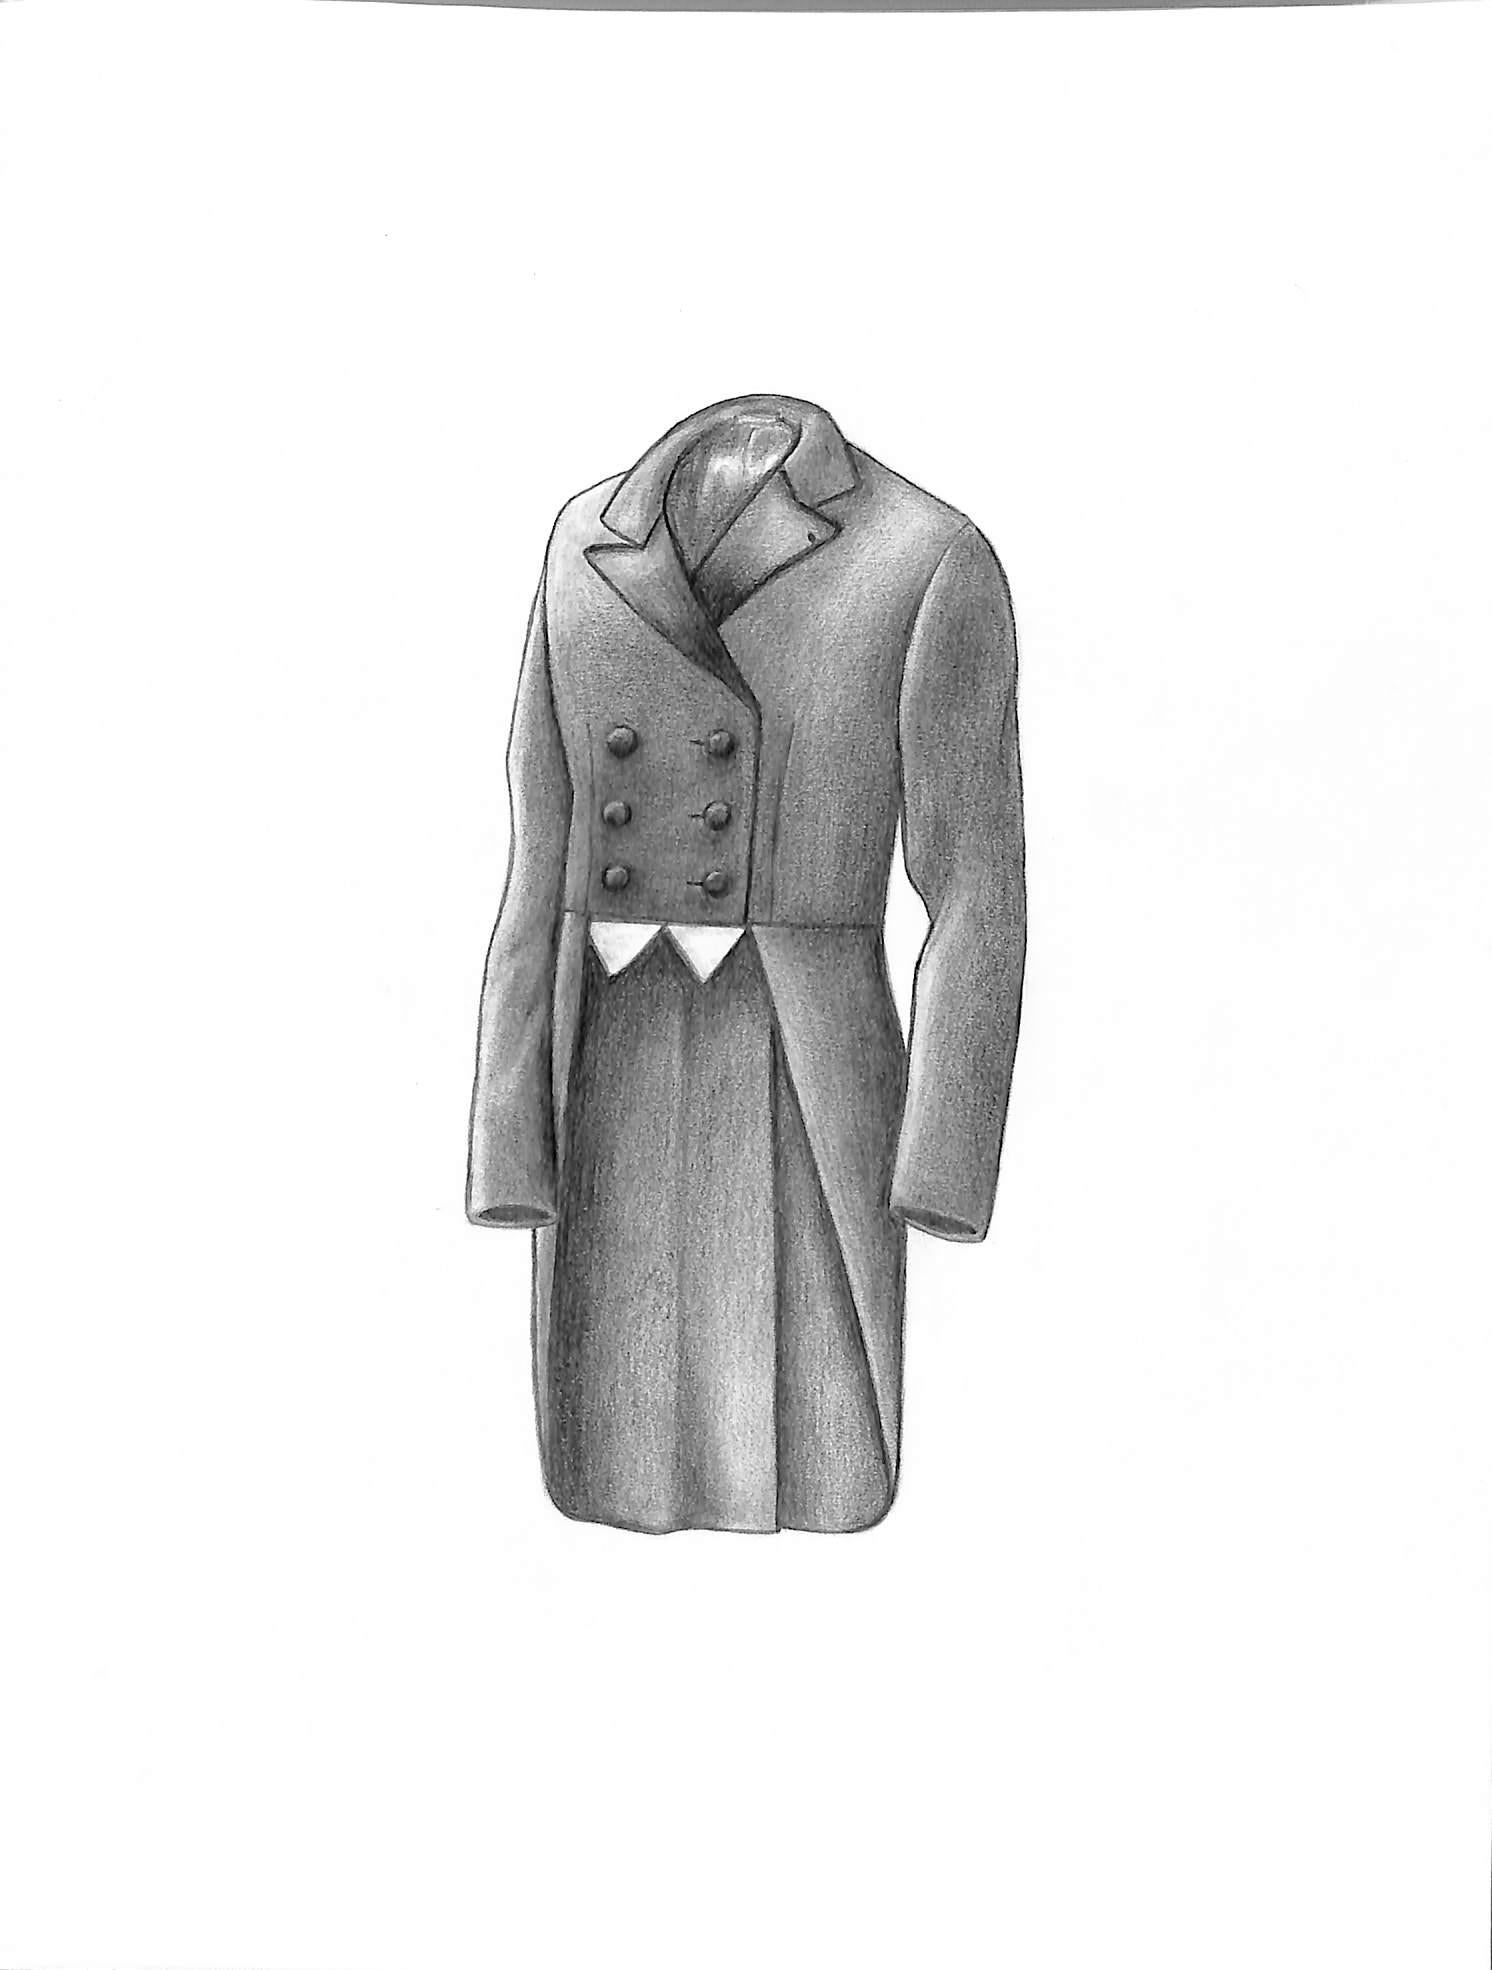 Ladies Hunt Coat 2003 Graphite Drawing - Art by Unknown